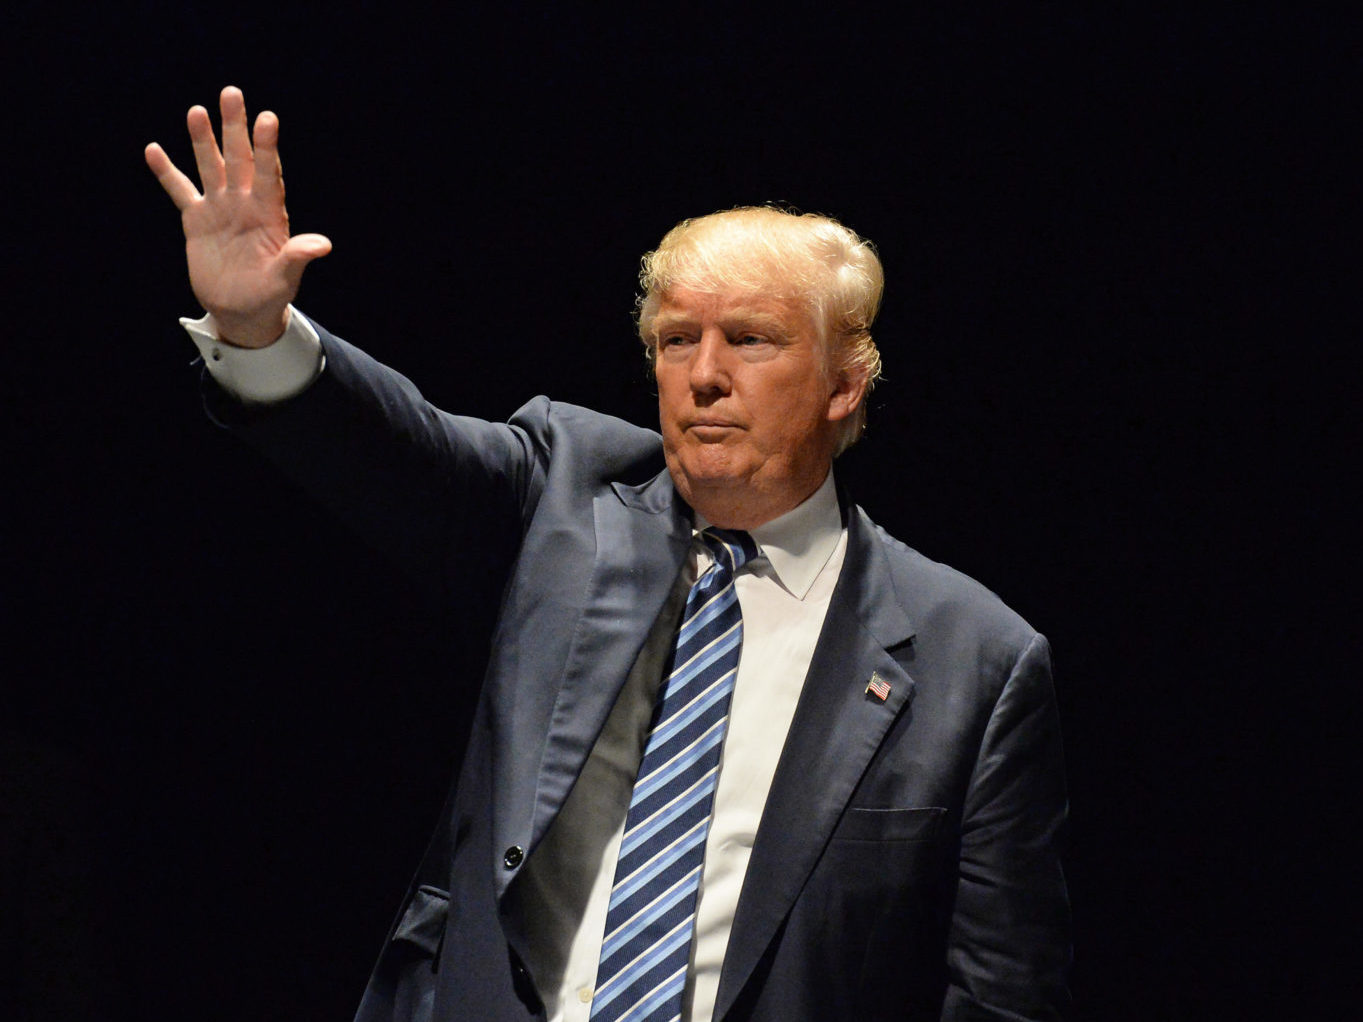 Donald Trump salutes supporters in Saint Louis, Missouri in March 2016.